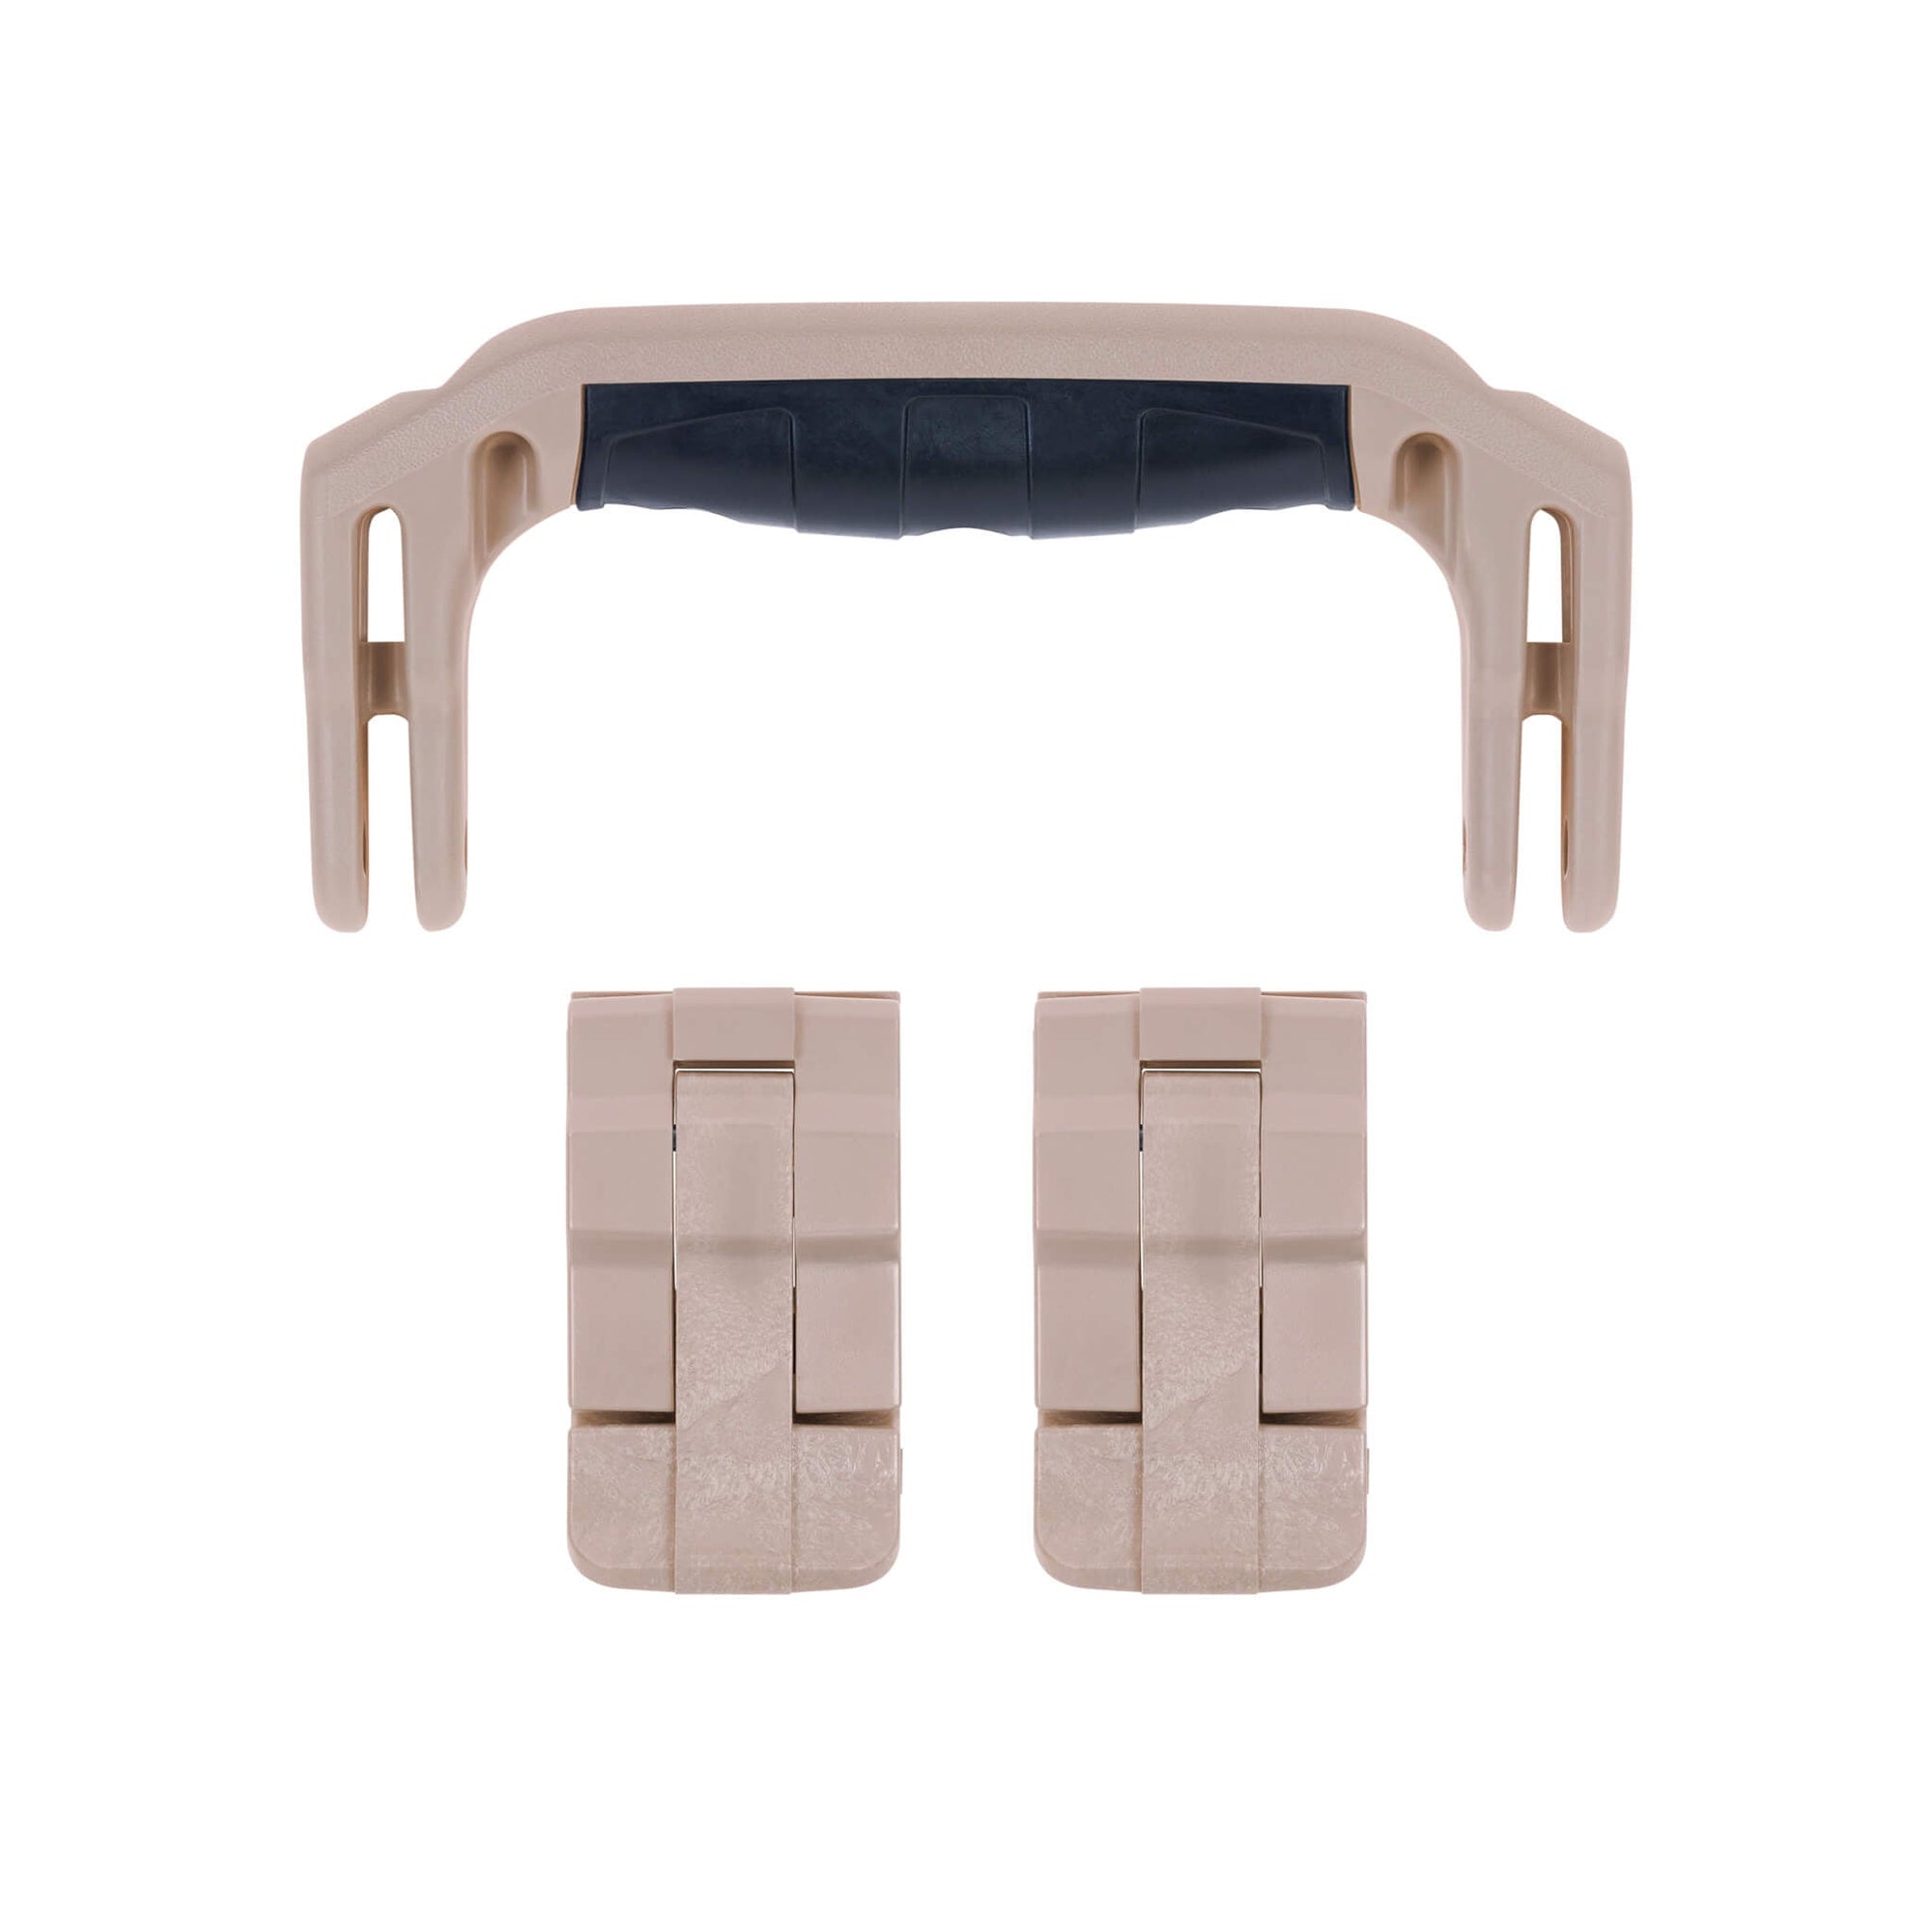 Pelican 1430 Replacement Handle & Latches, Desert Tan (Set of 1 Handle, 2 Latches) ColorCase 